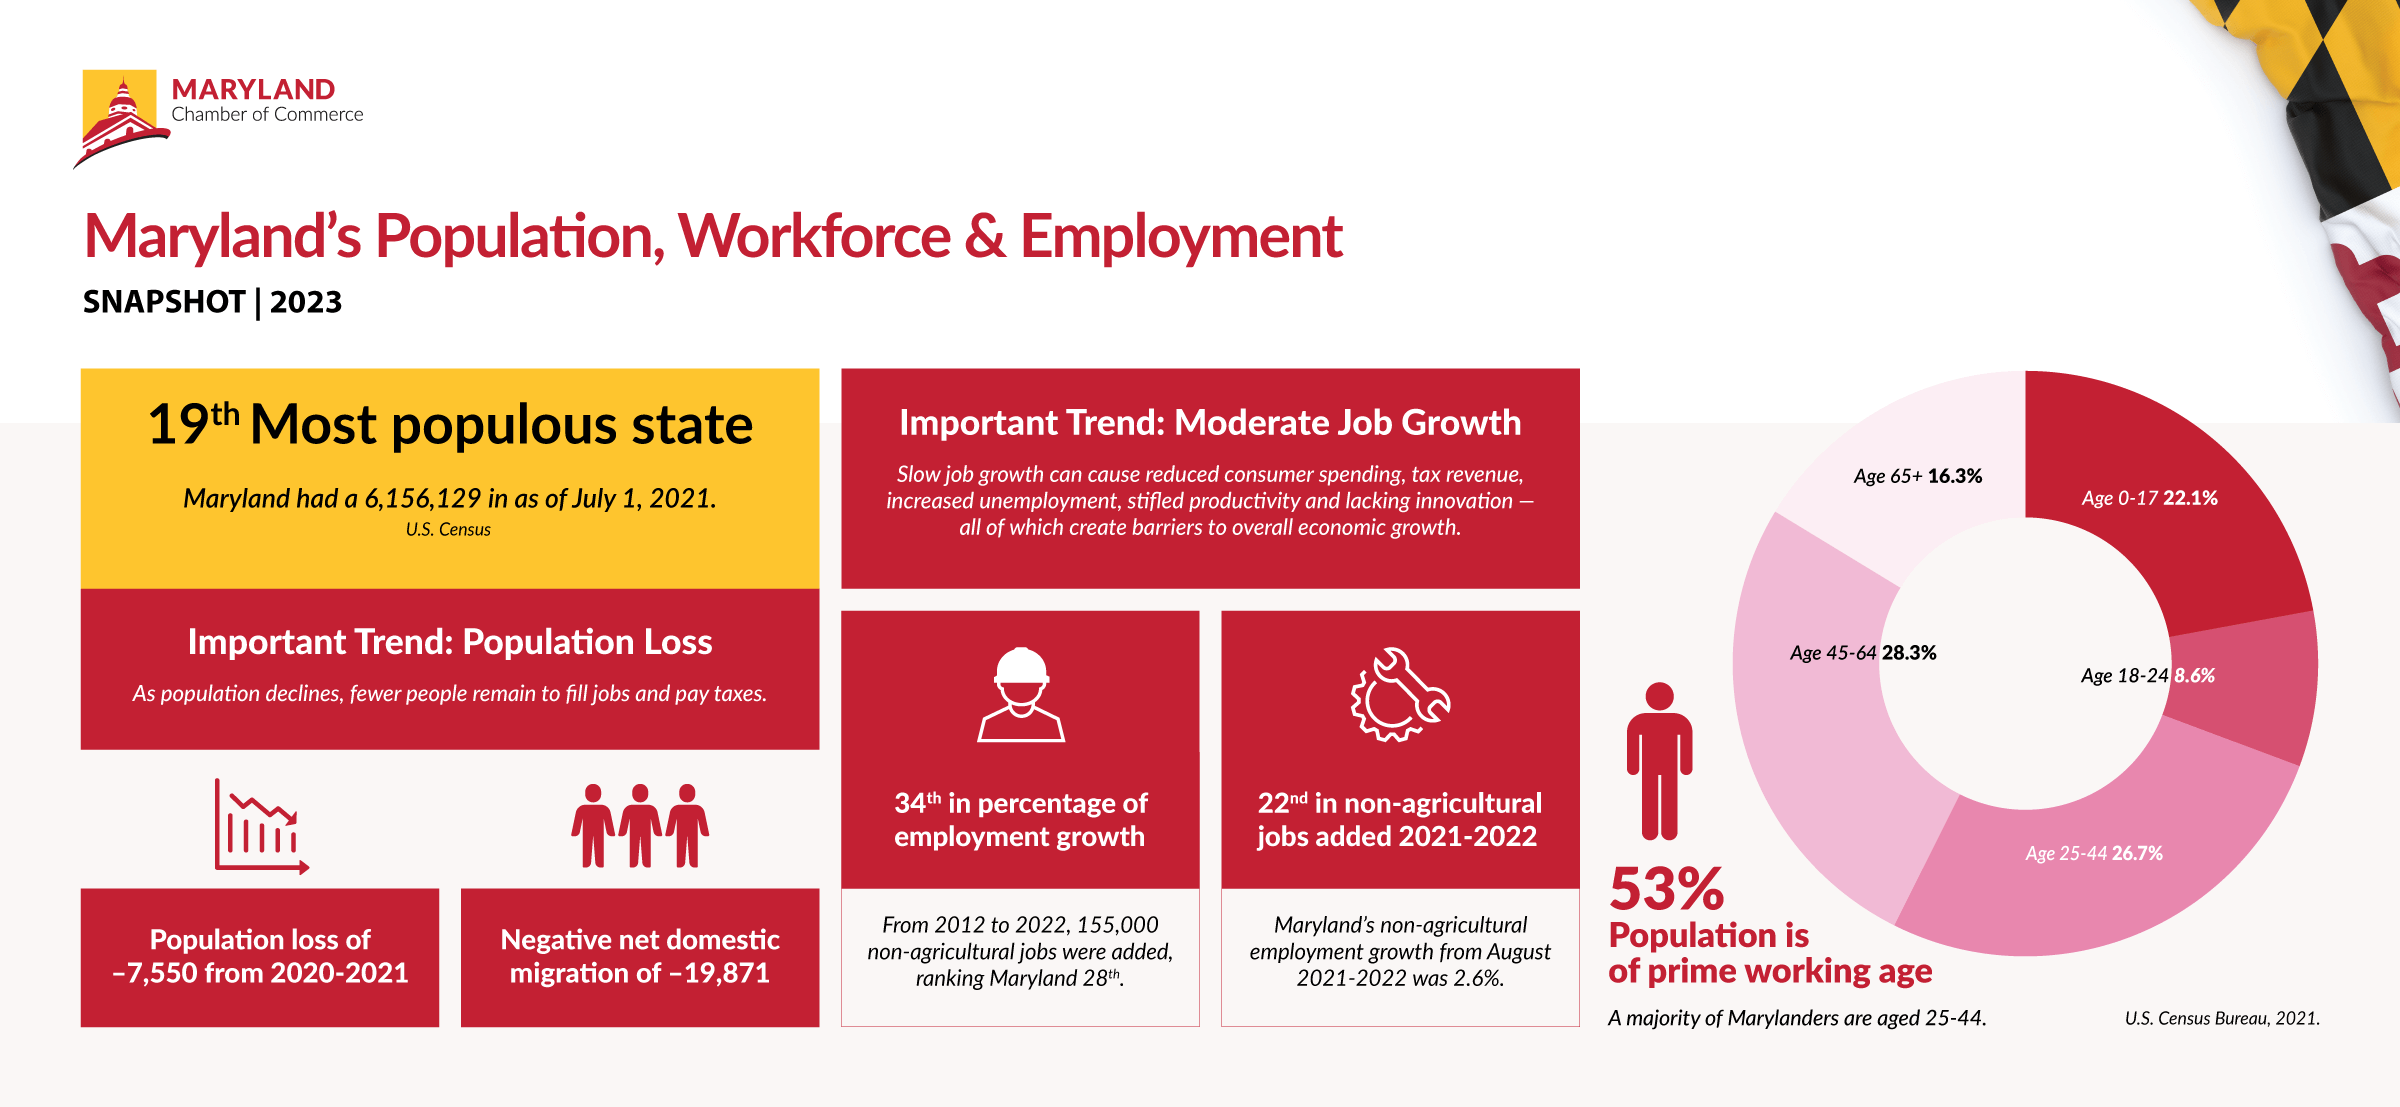 An infographic that demonstrates a variety of rankings regarding Maryland's population, workforce and employment indicators vs. other states across the nation, including: Maryland was ranked as the 19th most populous state in the country, with a population of 6,156,129 as of July 1, 2021. An important trend to pay attention to is population loss. As population declines, fewer people remain to fill jobs and pay taxes. The state saw a population loss of -7,550 from 2020 to 2021 and a negative net domestic migration of -19,871. Another important trend to pay attention to is moderate job growth. Slow job growth can cause reduced consumer spending, tax revenue, increased unemployment, stifled productivity and lacking innovation - all of which create barriers to overall economic growth. Maryland ranks 24th in percentage of employment growth. From 2012 to 2022, 155,000 non-agricultural jobs were added, ranking Maryland 28th. The state ranked 22nd in non-agricultural jobs added between 2021-2022. Maryland's non-agricultural employment growth from August 2021 to 2022 was 2.6.%. 53% of Maryland's population is of prime working age. A majority of Marylanders are aged 25-44.